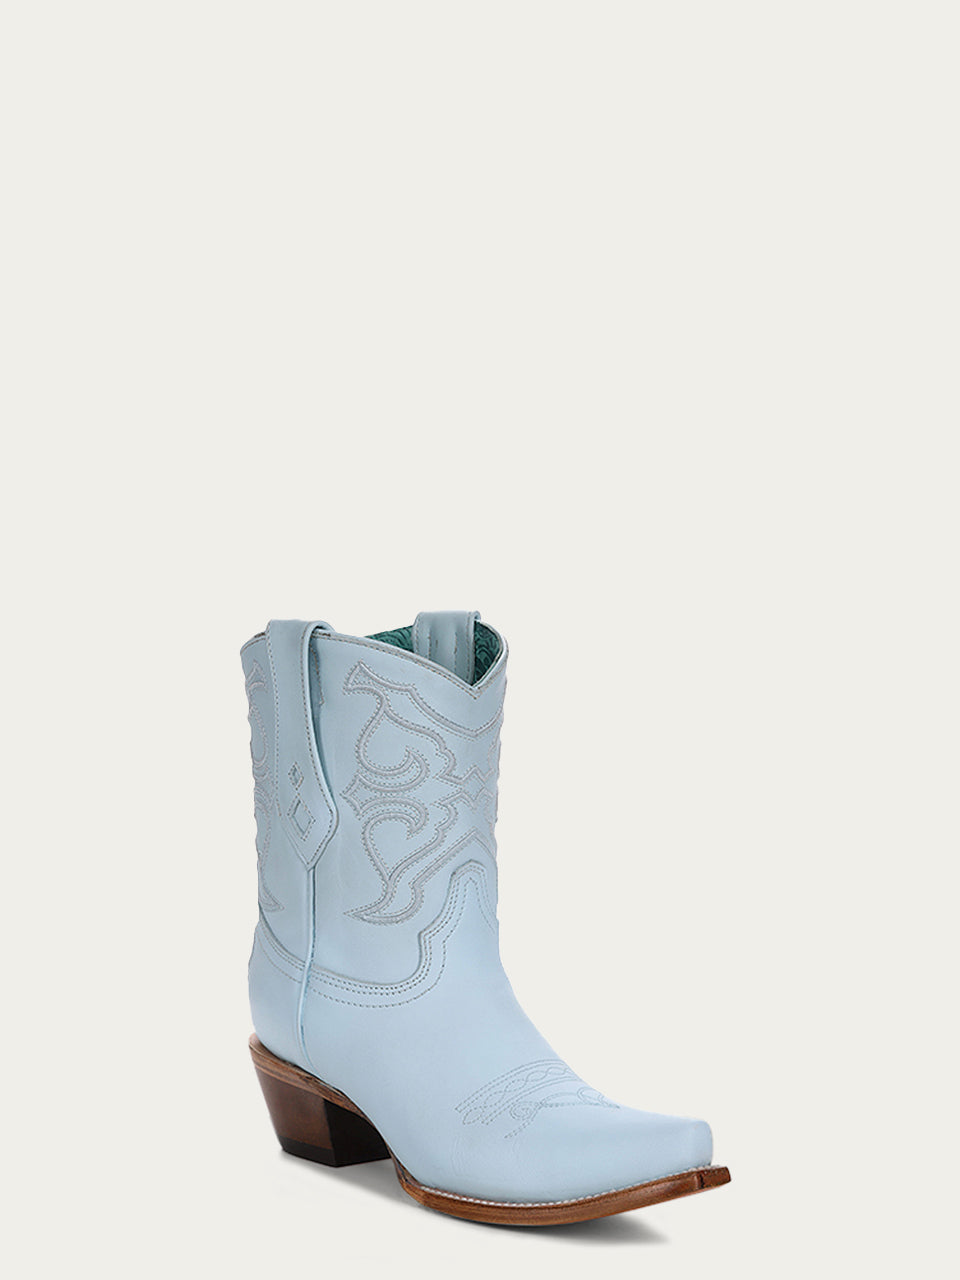 Z5255 - WOMEN'S EMBROIDERY BABY BLUE SNIP TOE ANKLE BOOT